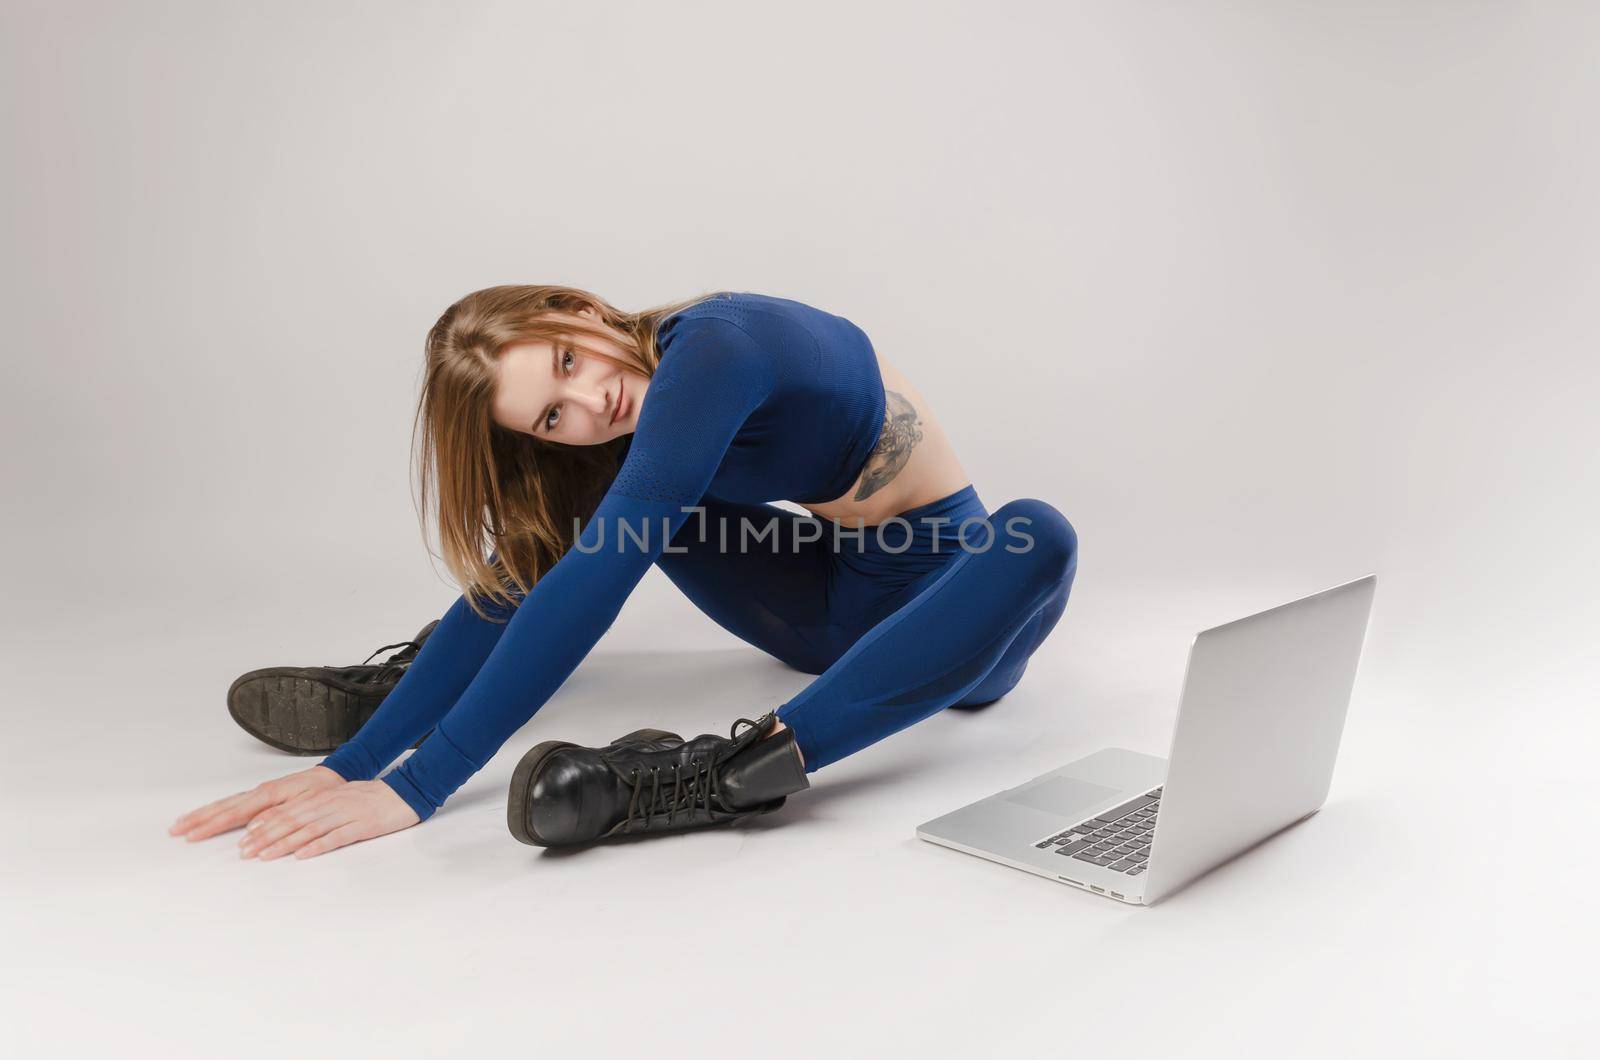 athletic girl posing in the Studio performing exercises online on a laptop on a white background by Rotozey